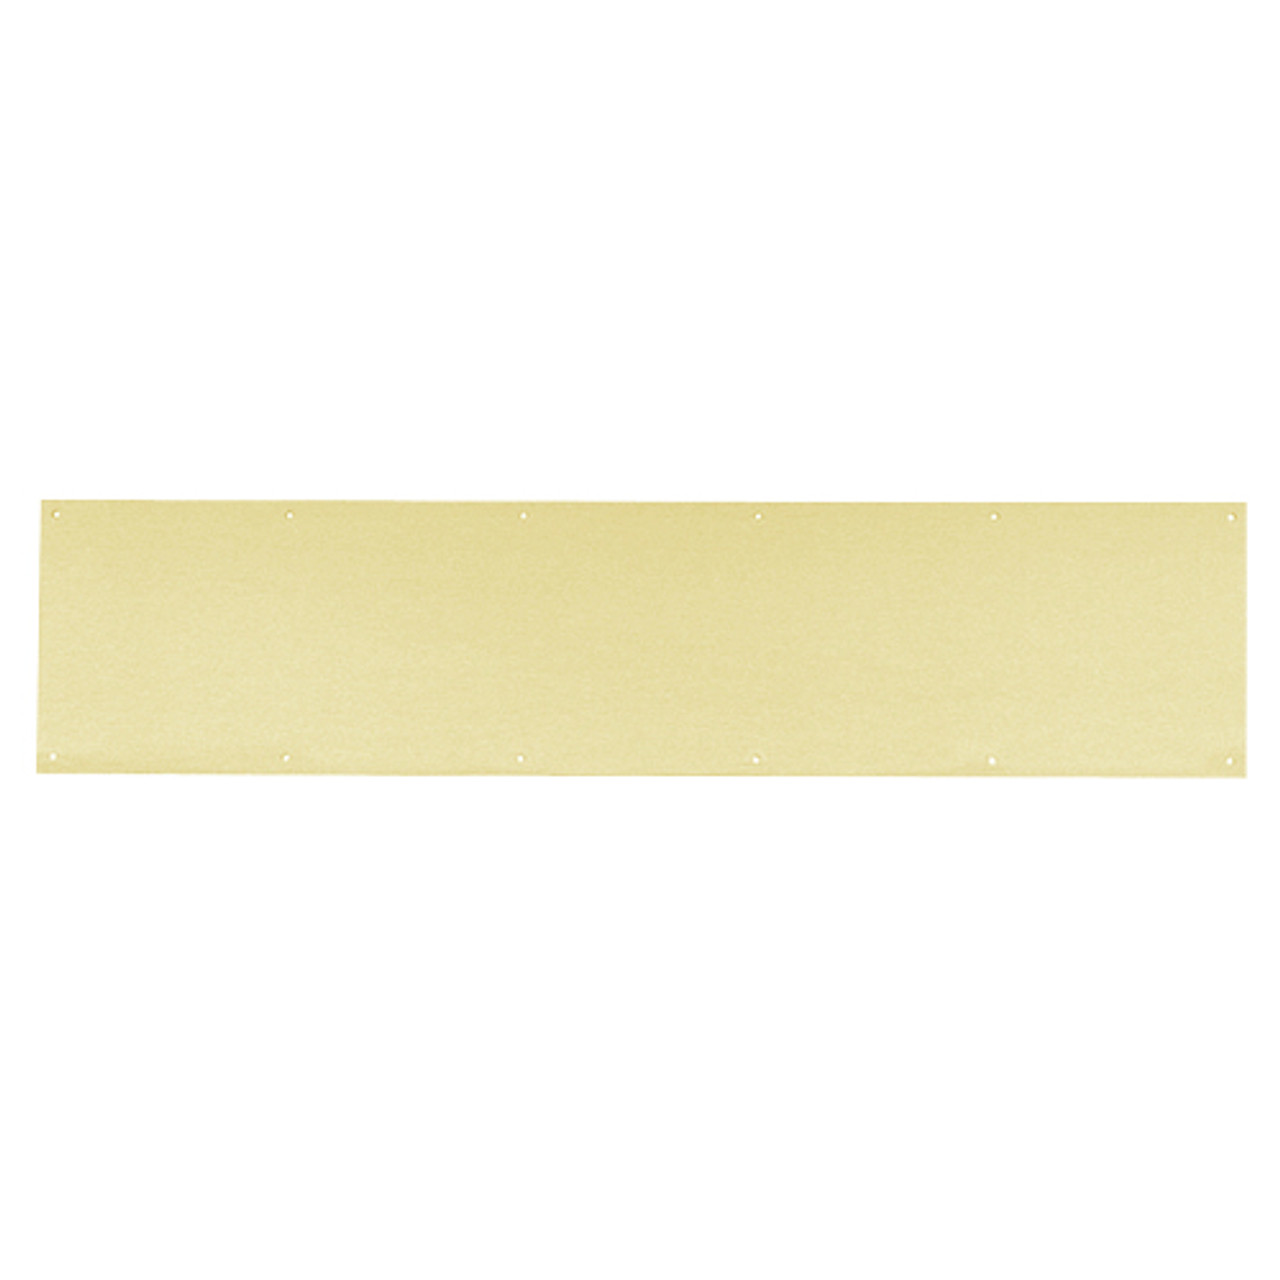 8400-US4-8x40-B-CS Ives 8400 Series Protection Plate in Satin Brass